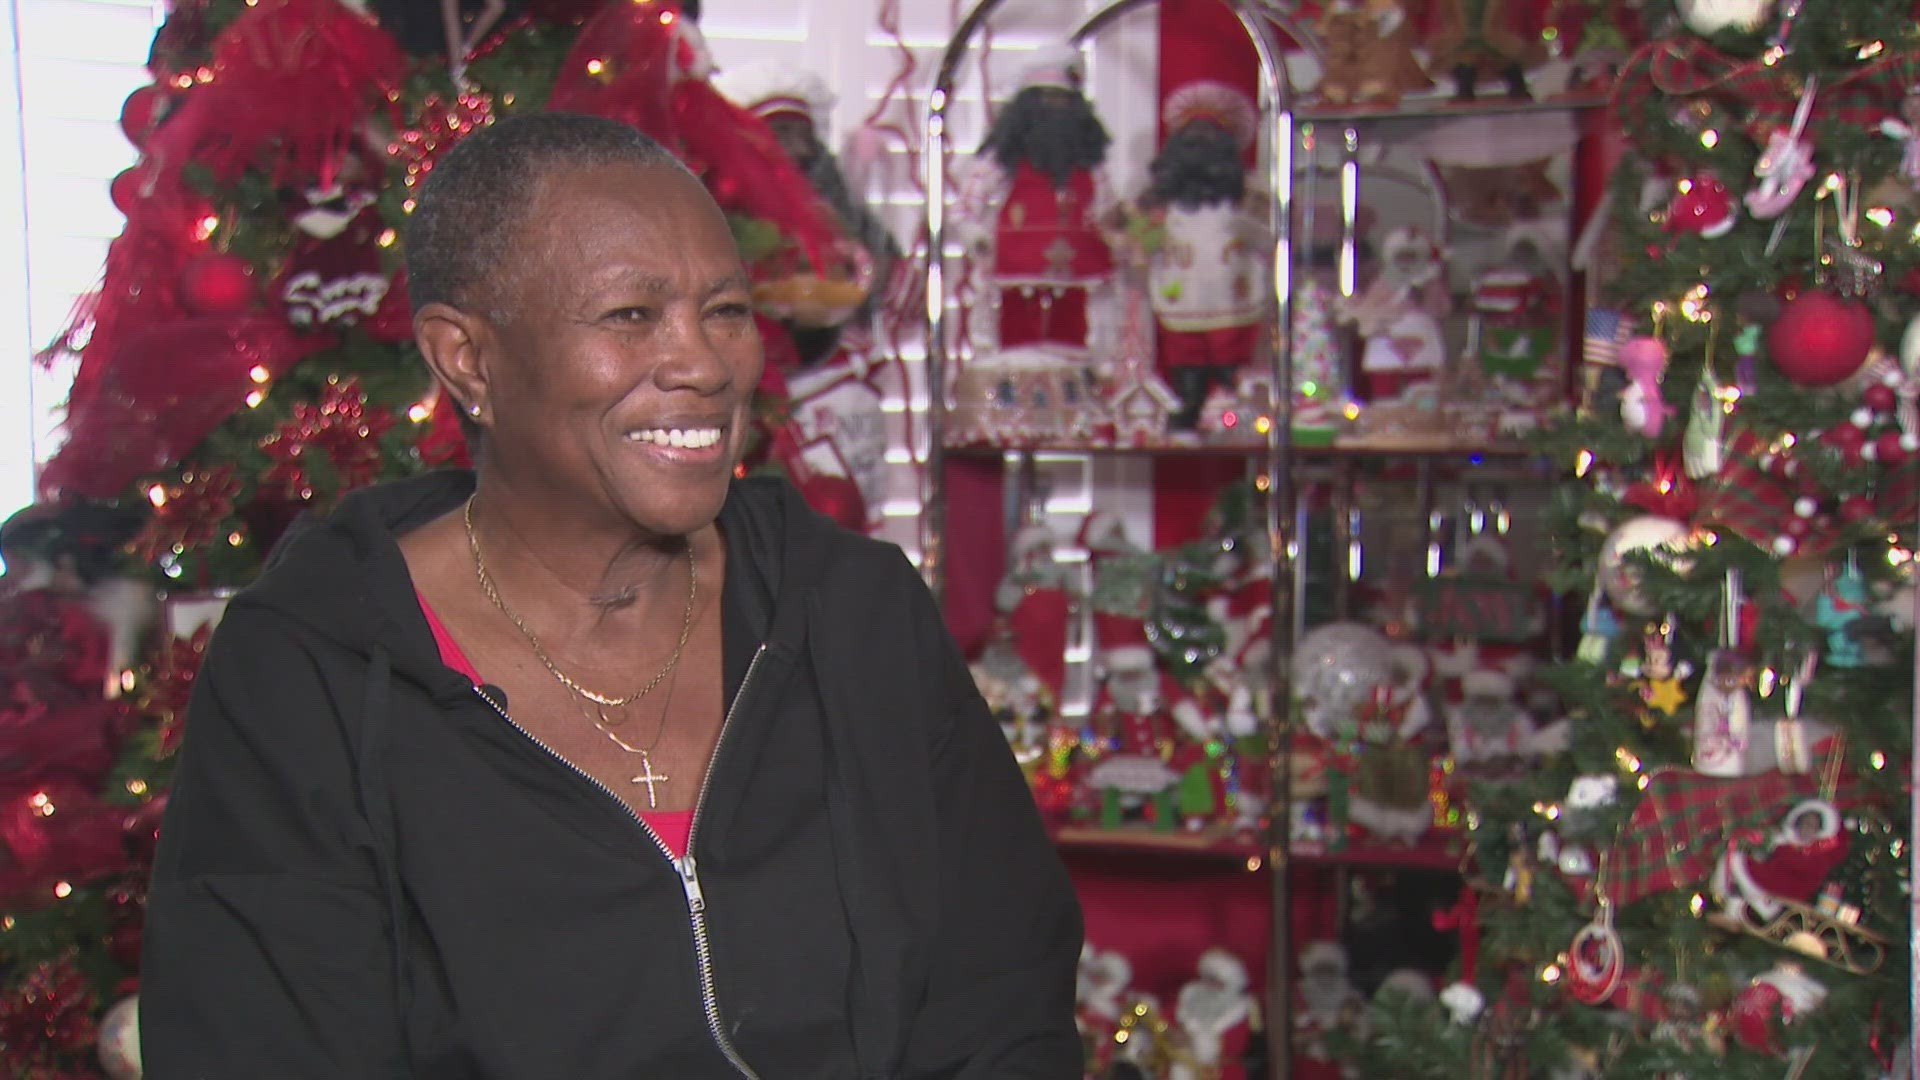 A unique story on a Valley woman who loves Christmas, but keeps traditions hidden.